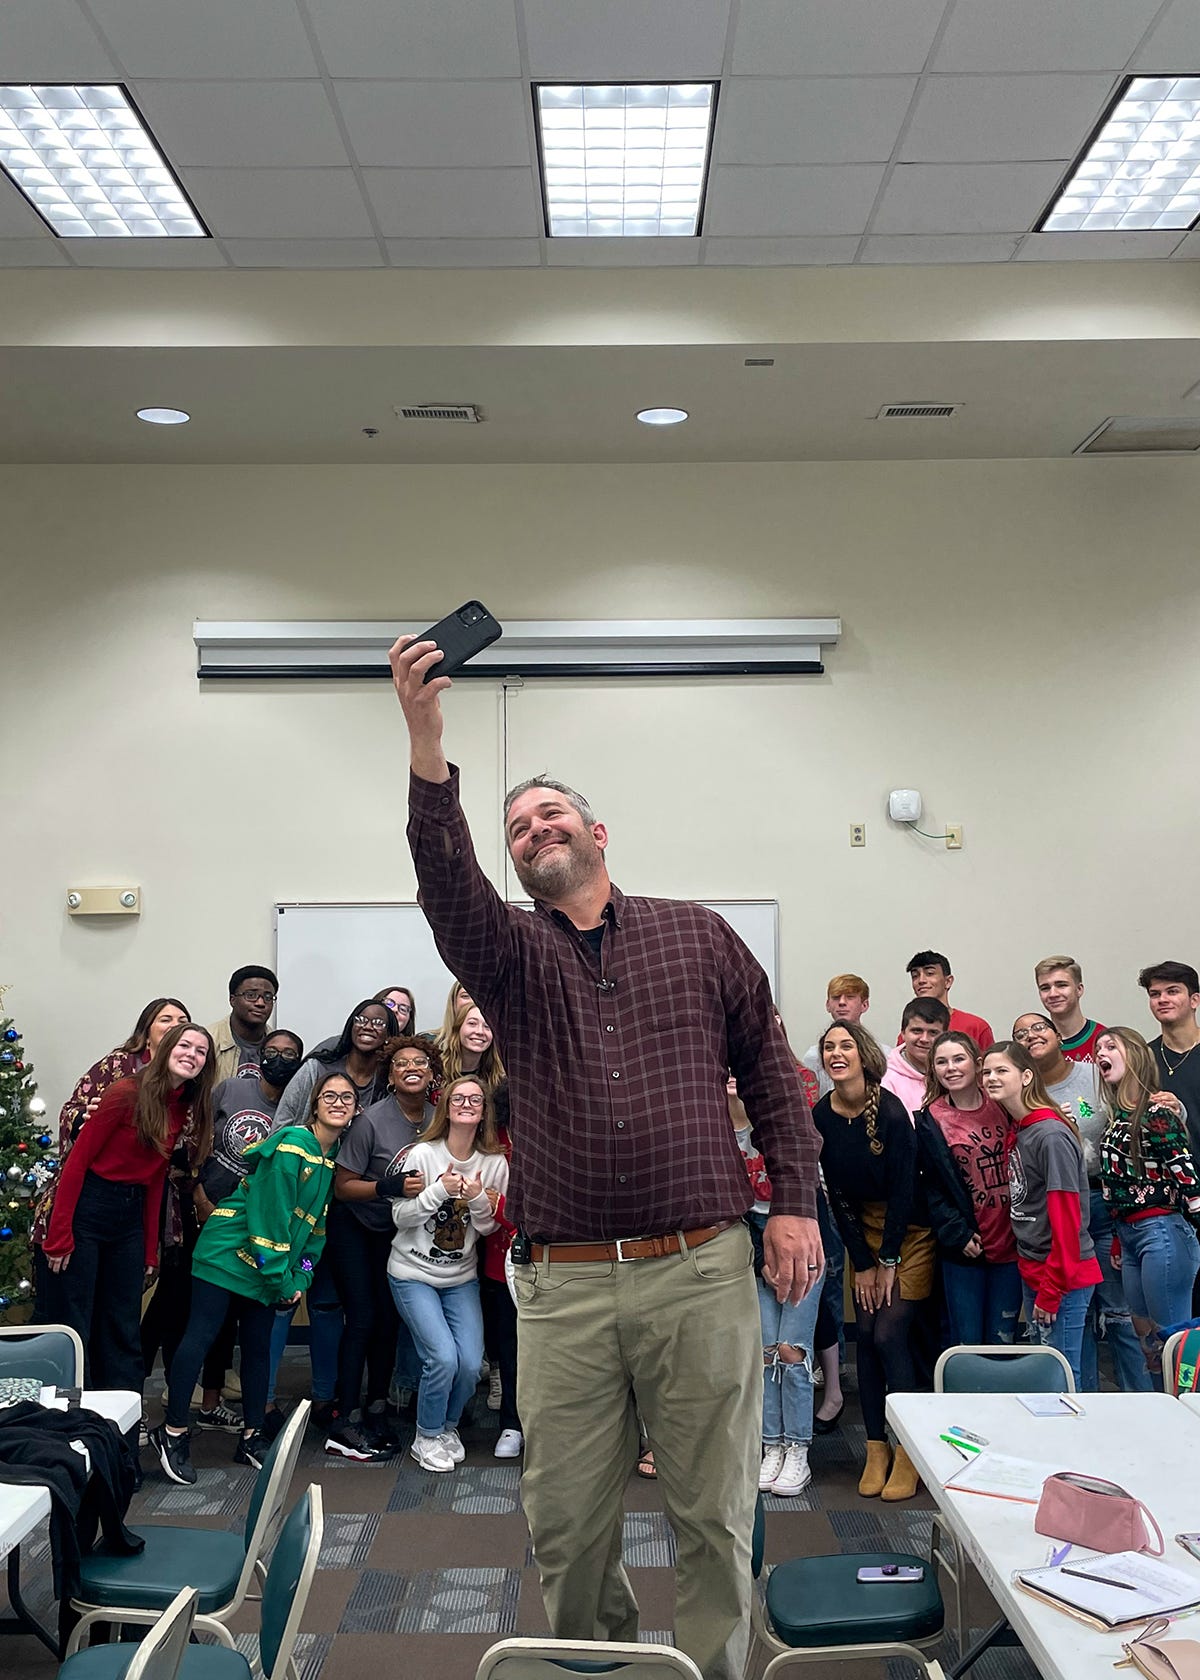 Crestview City Manager Tim Bolduc takes a selfie with Crestview High School SGA members during a presentation Dec. 9.